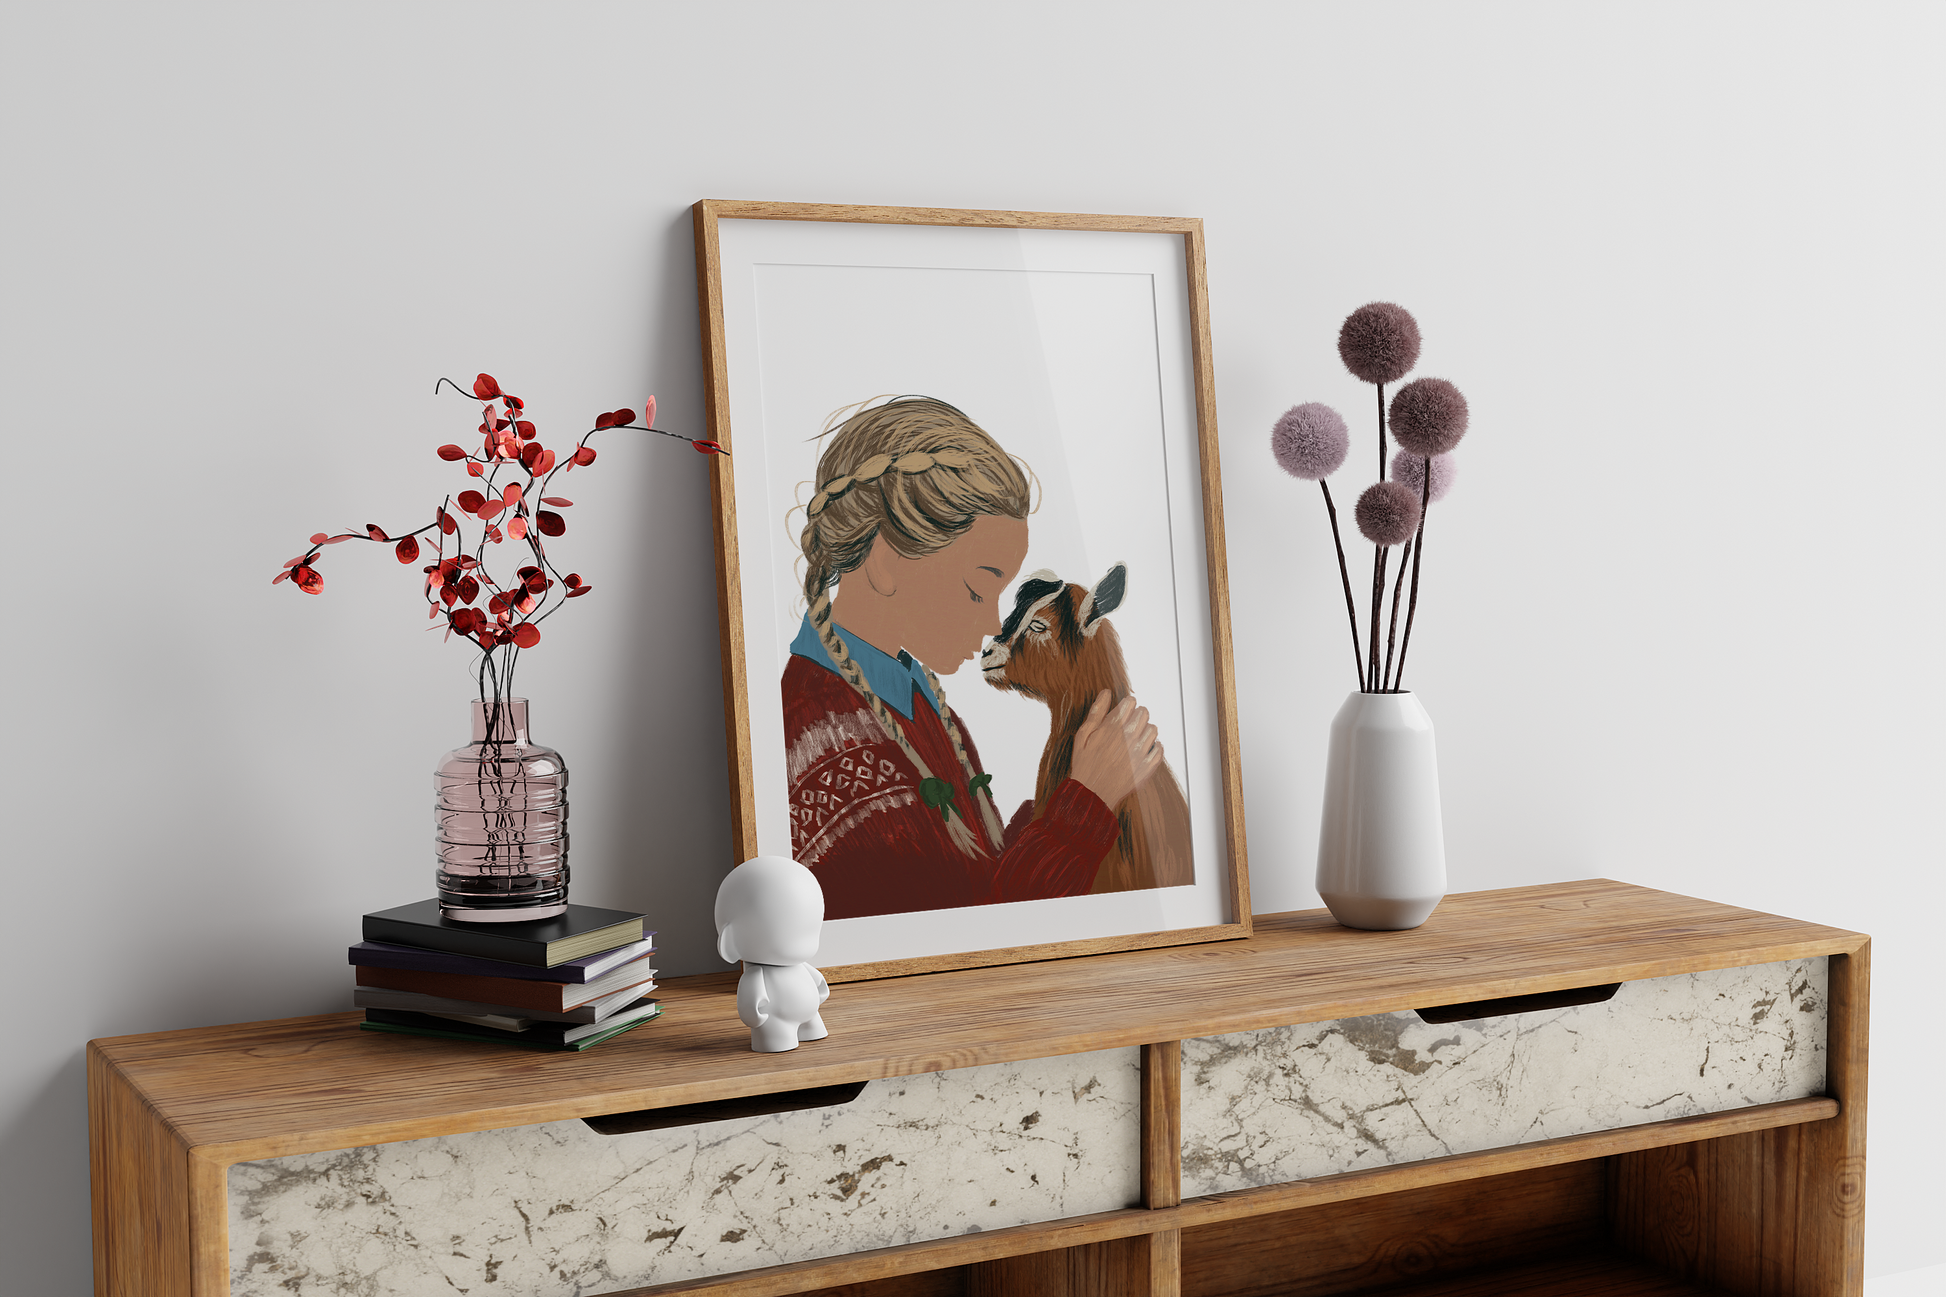 A modern sideboard decorated with a framed printable digital painting of a girl embracing a goat, accompanied by artistic vases and books.